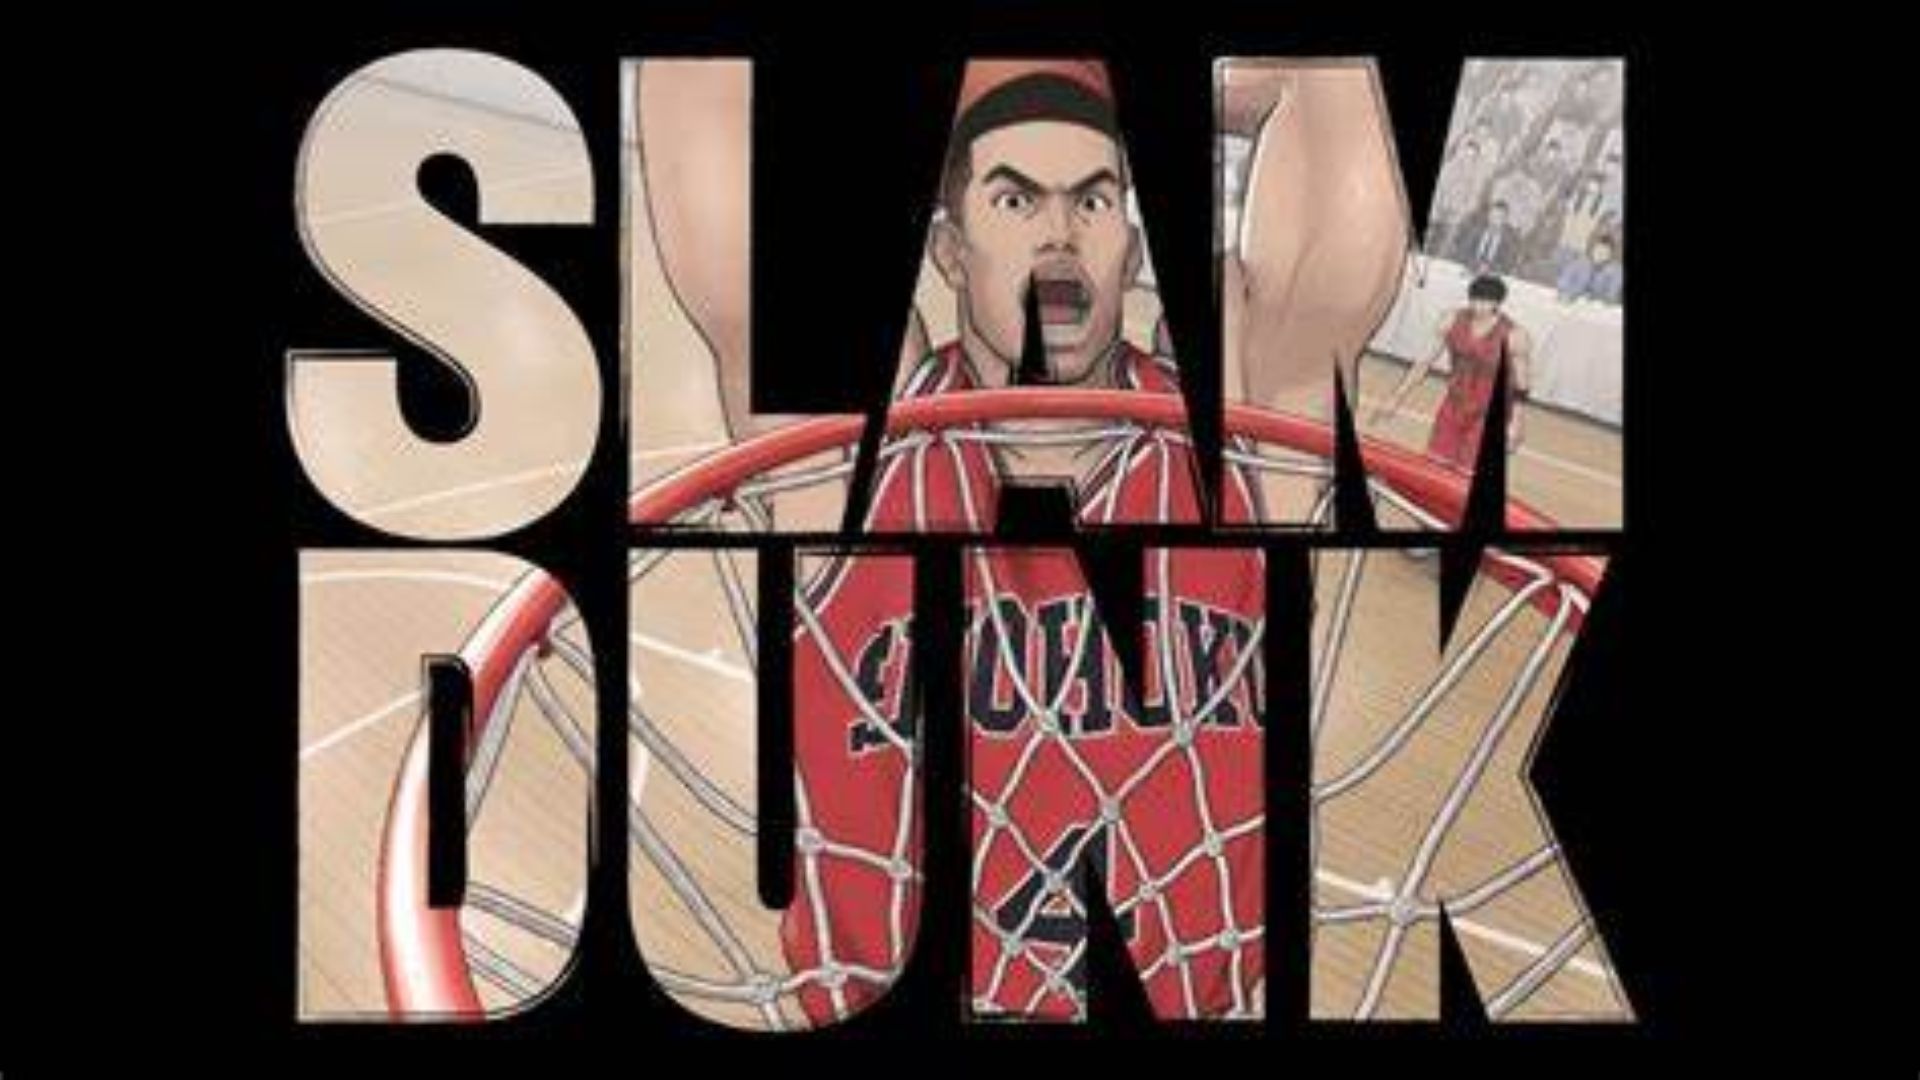 The First slam dunk movie offical poster